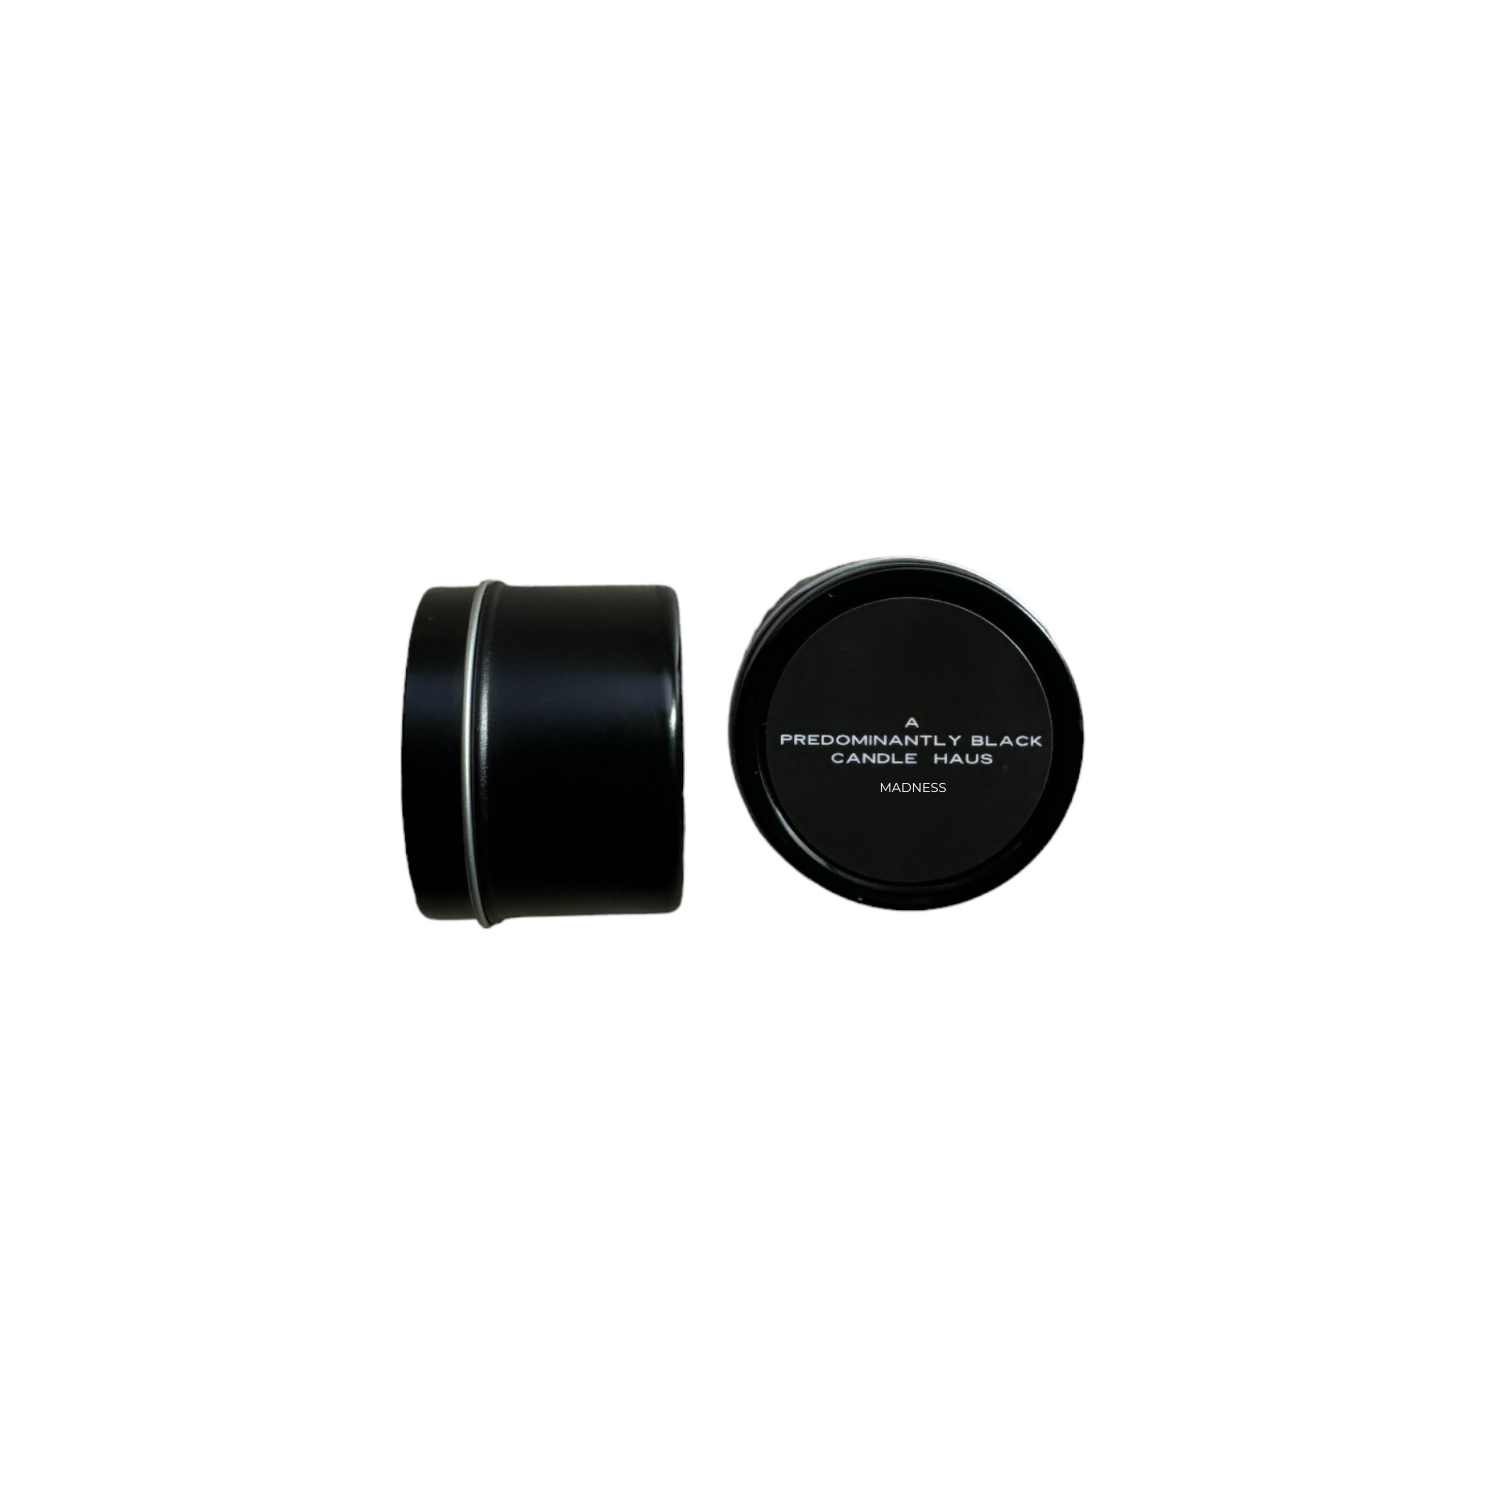 Predominantly Black 2 ounce MADNESS candle container with lid, featuring minimalist label design.